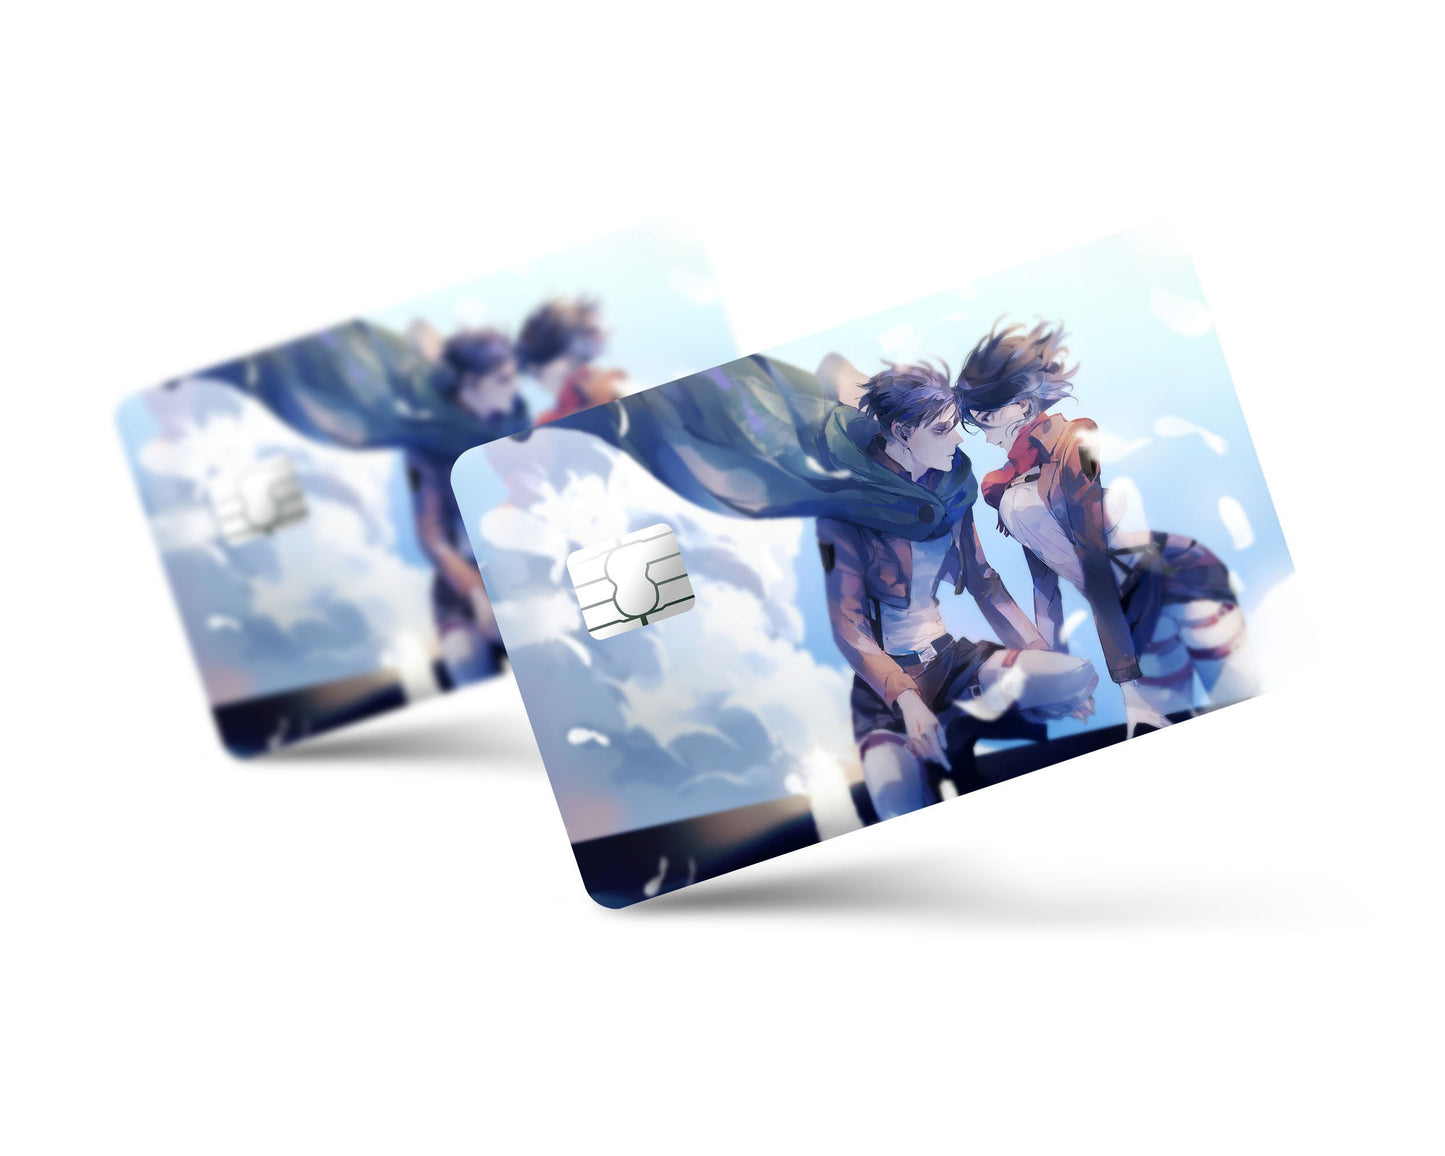 Anime Town Creations Credit Card Attack On Titan Mikasa and Levi Full Skins - Anime Attack on Titan Skin